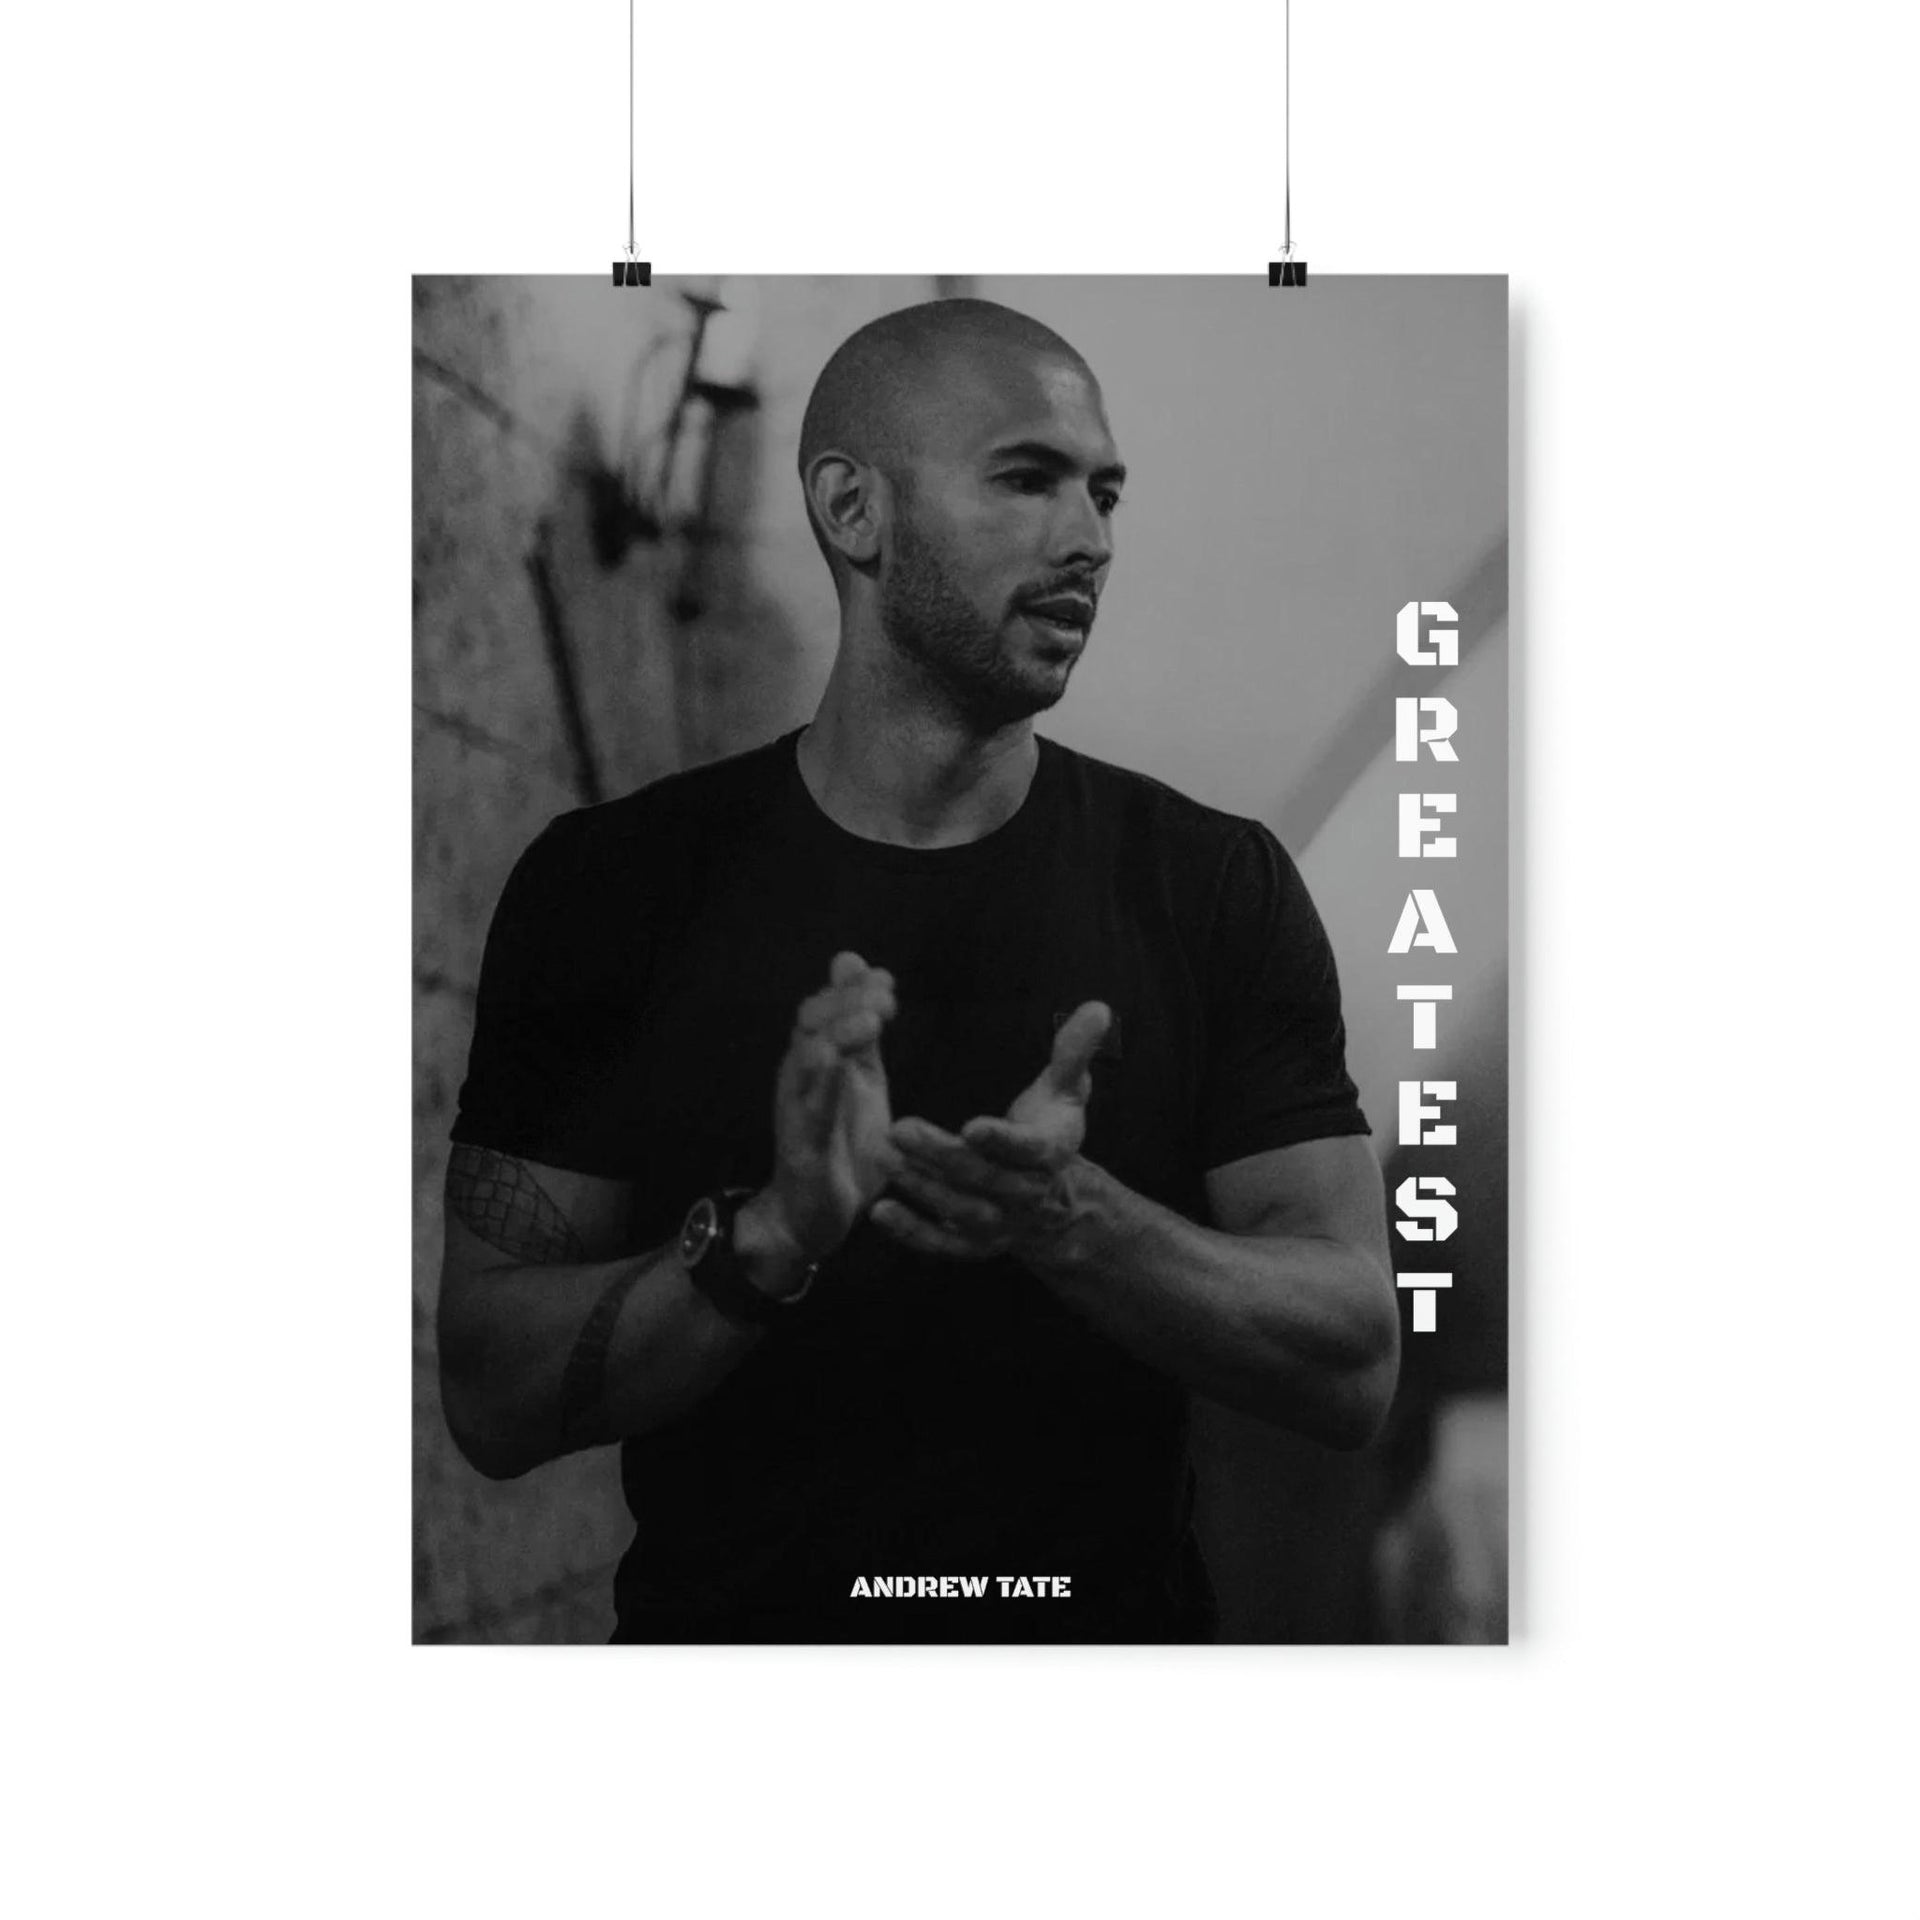 Stay motivated to achieve greatness with an Andrew Tate motivational poster featuring the quote 'Greatest.' Available worldwide in various sizes and at affordable prices.